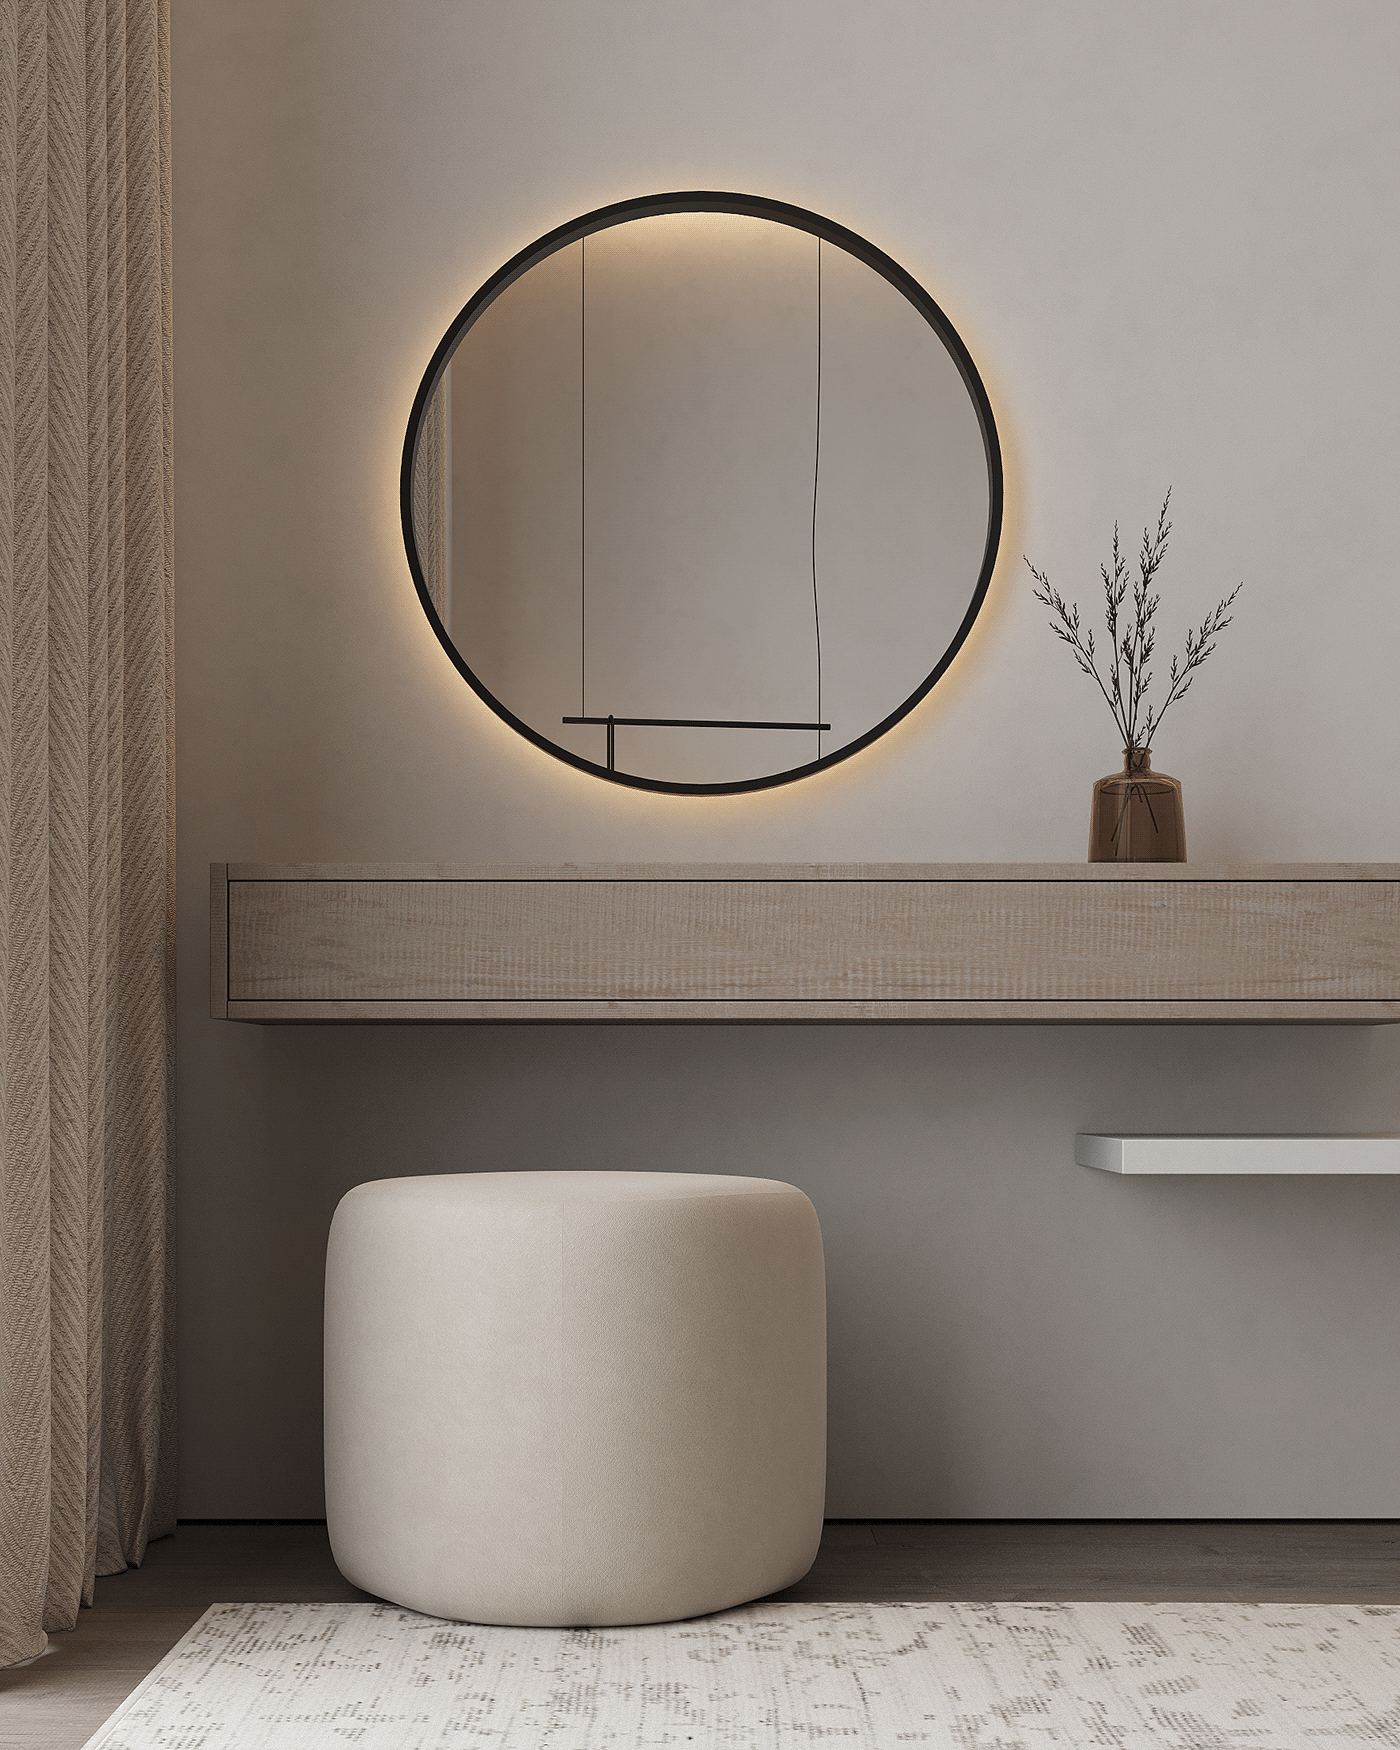 Round Mirror Designs: Add a Touch of Elegance with Chic Circular Mirrors